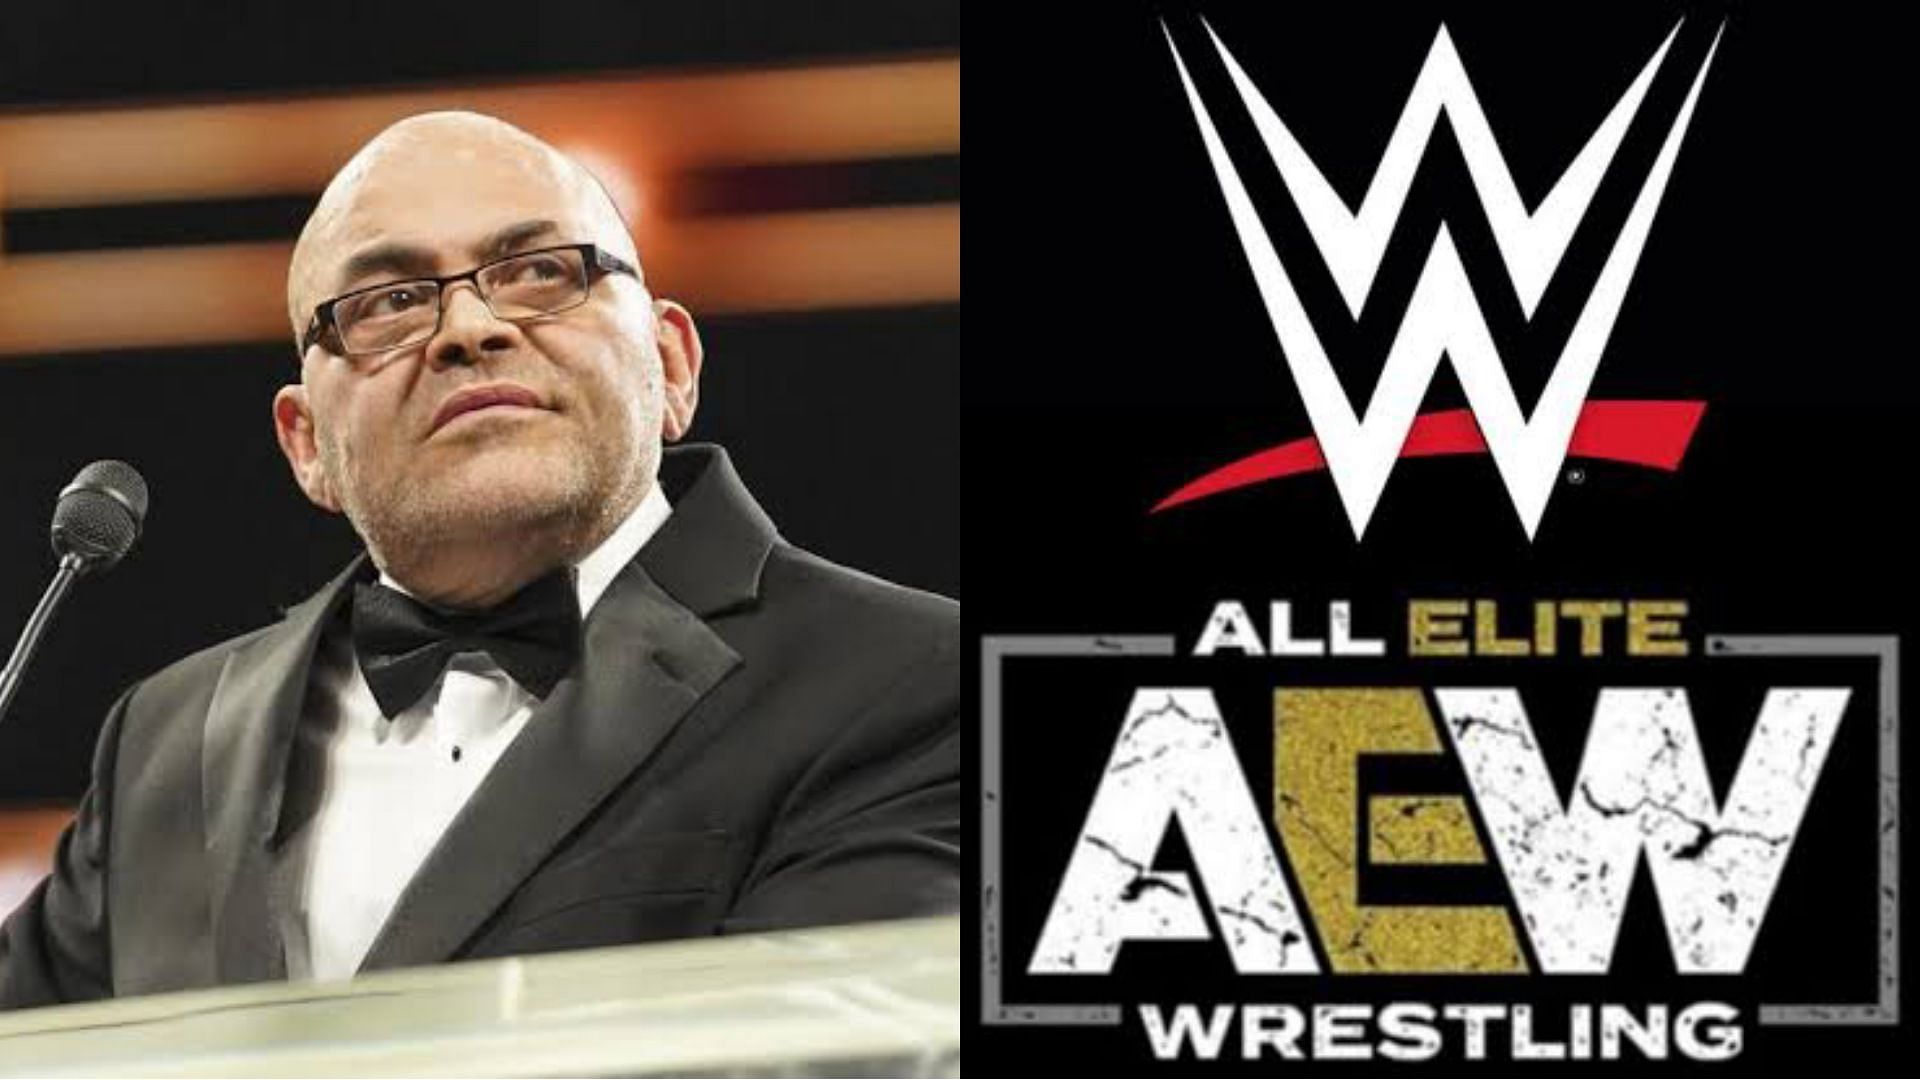 AEW have signed multiple former WWE Superstars throughout the years